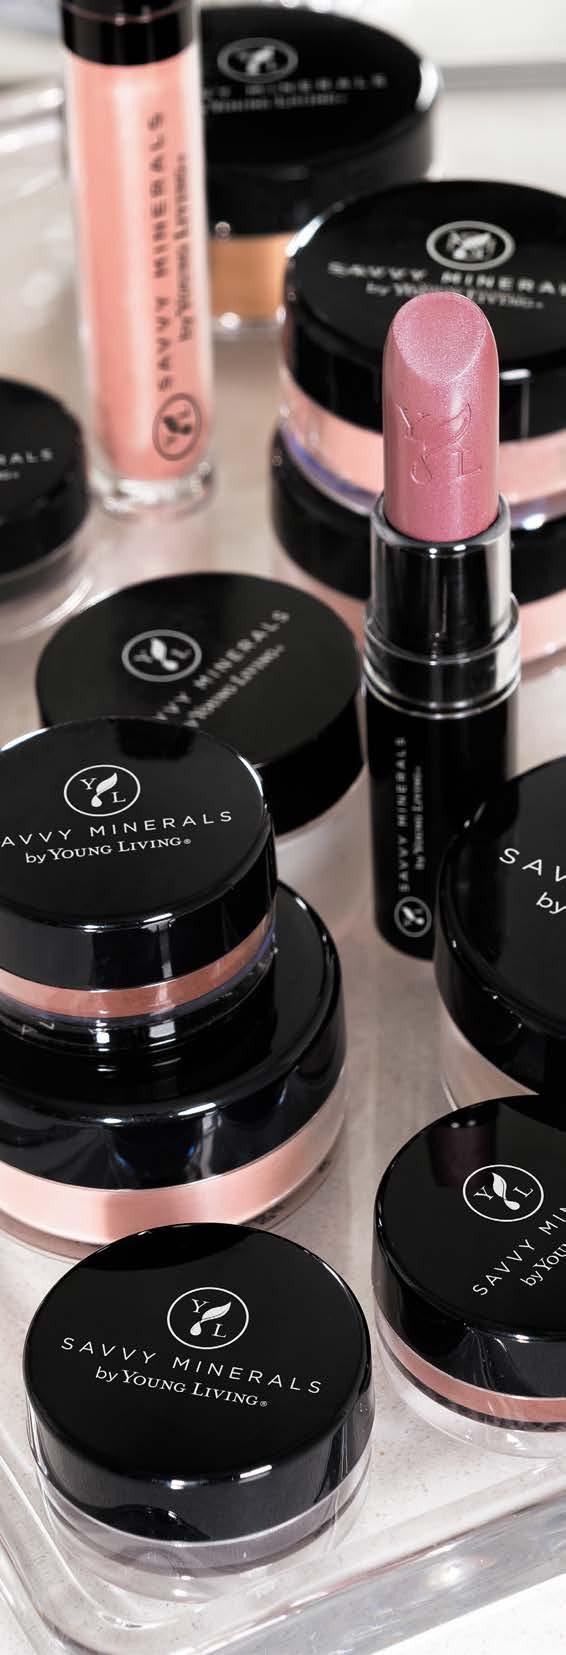 CONFIDENCE WITHOUT COMPROMISE When you choose our mineral-based, non-comedogenic, essential oil-infused makeup, you can feel good about what you put on your skin.